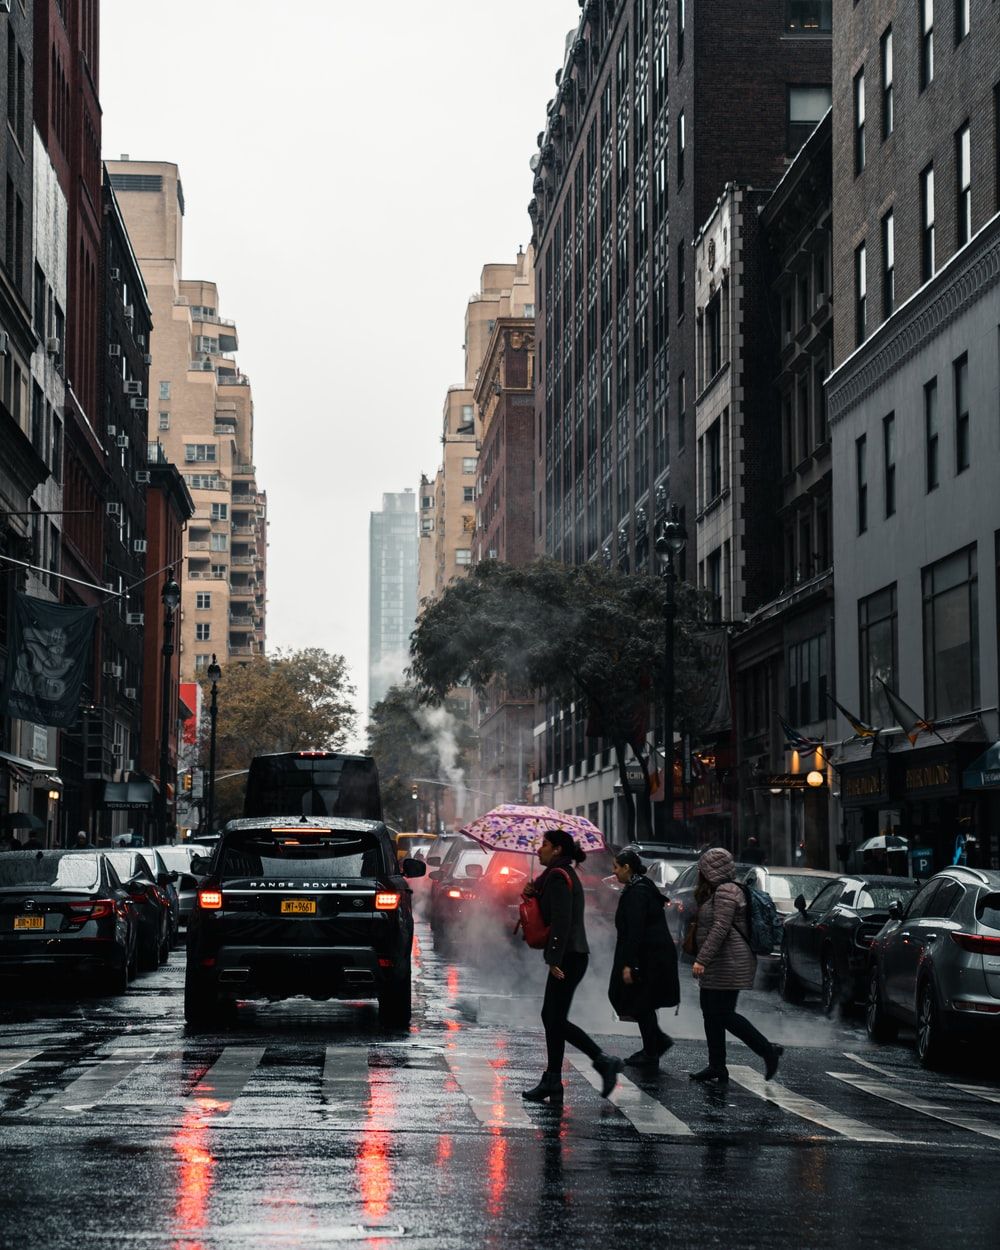 Rainy New York Picture. Download Free Image